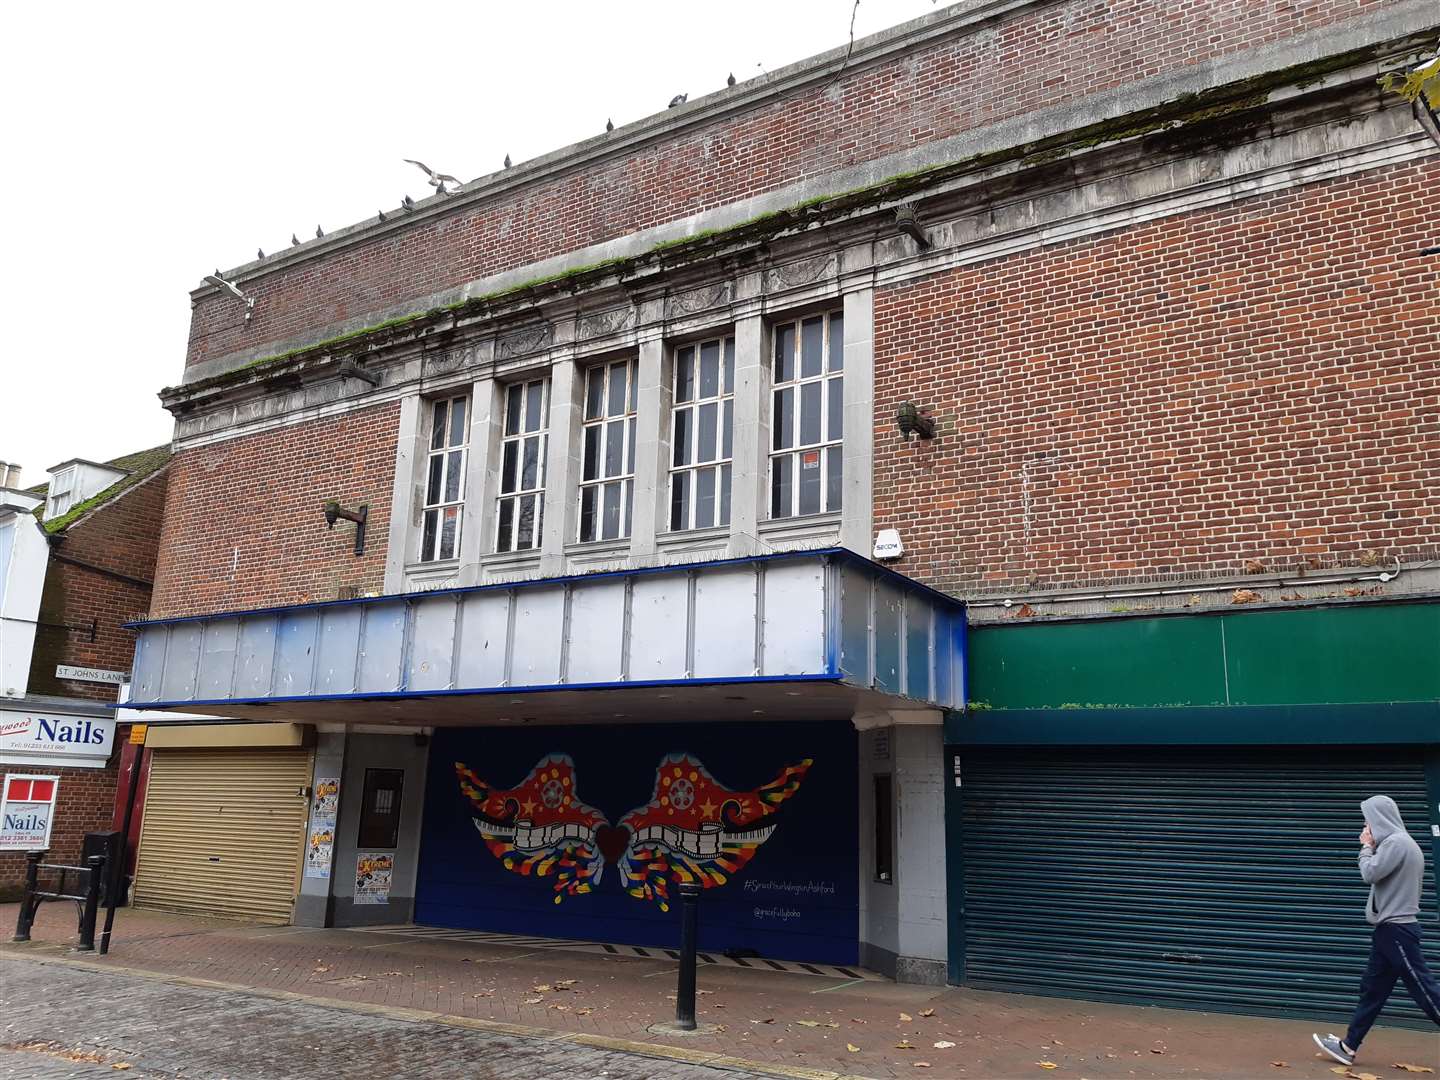 Plans to partially demolish the former Mecca Bingo are not mentioned in the 'reset' document